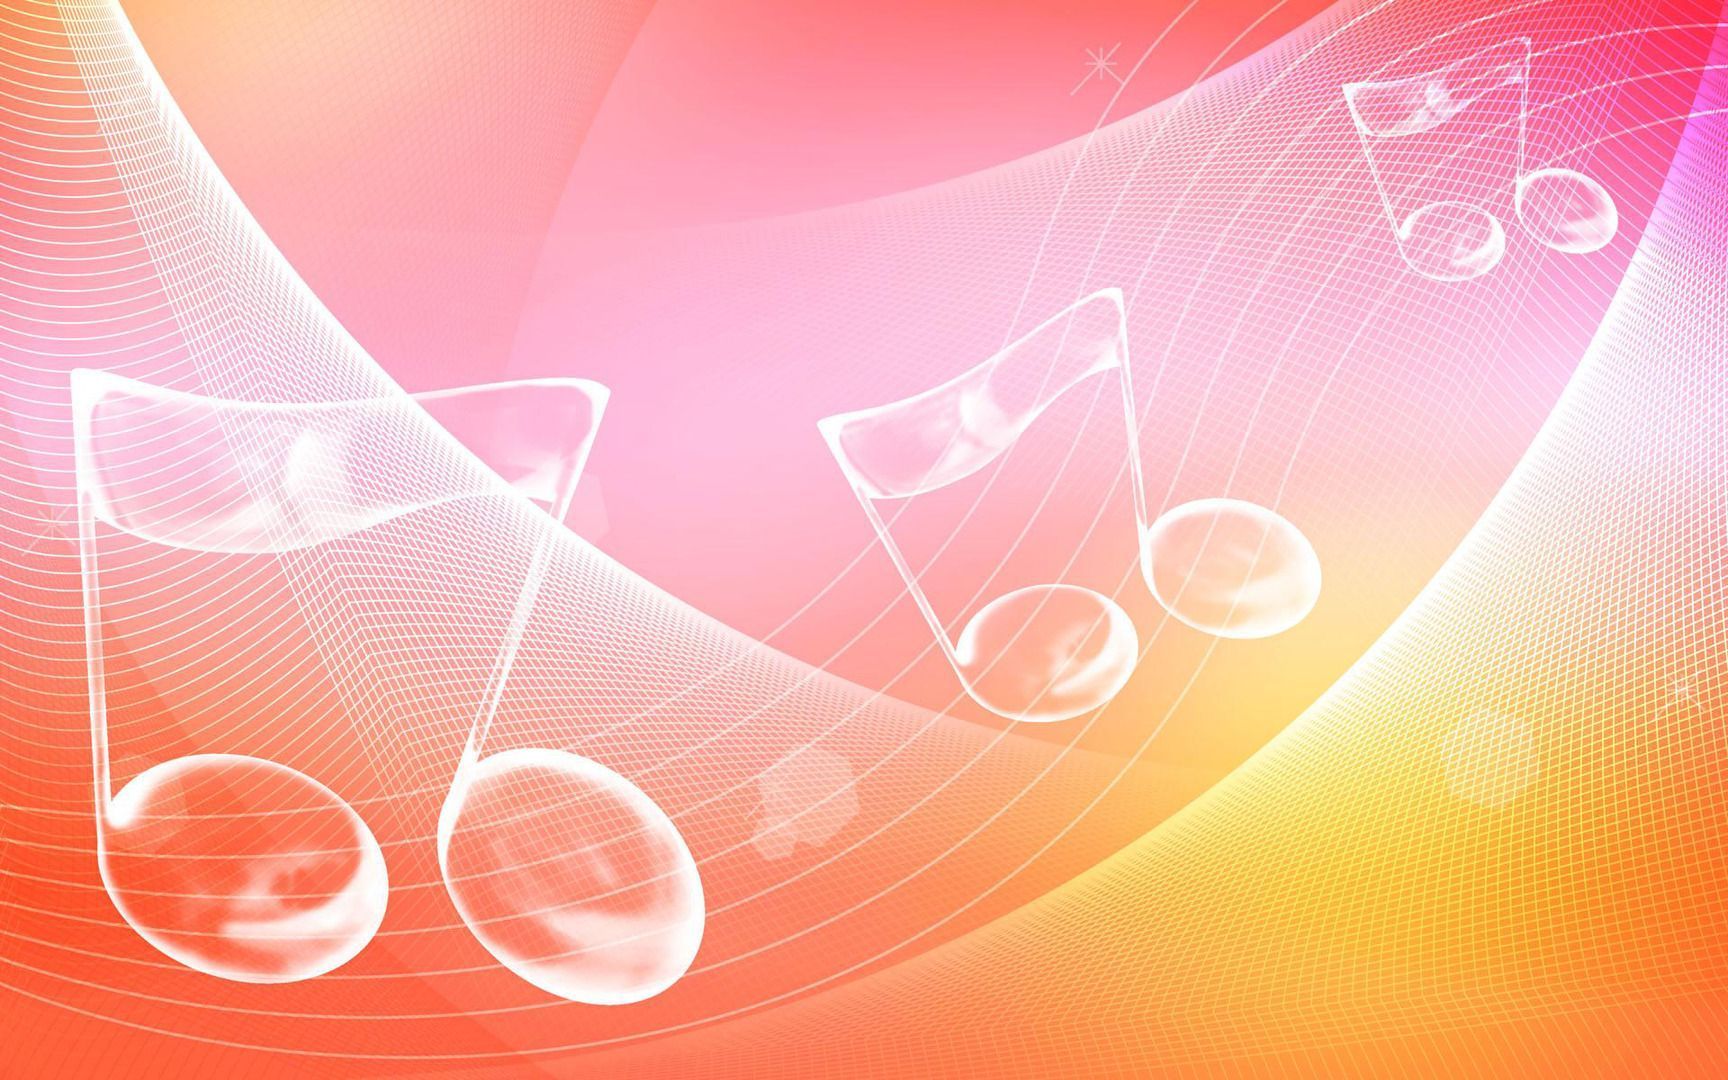 Translucent musical notes wallpaper - Free Wide HD Wallpaper